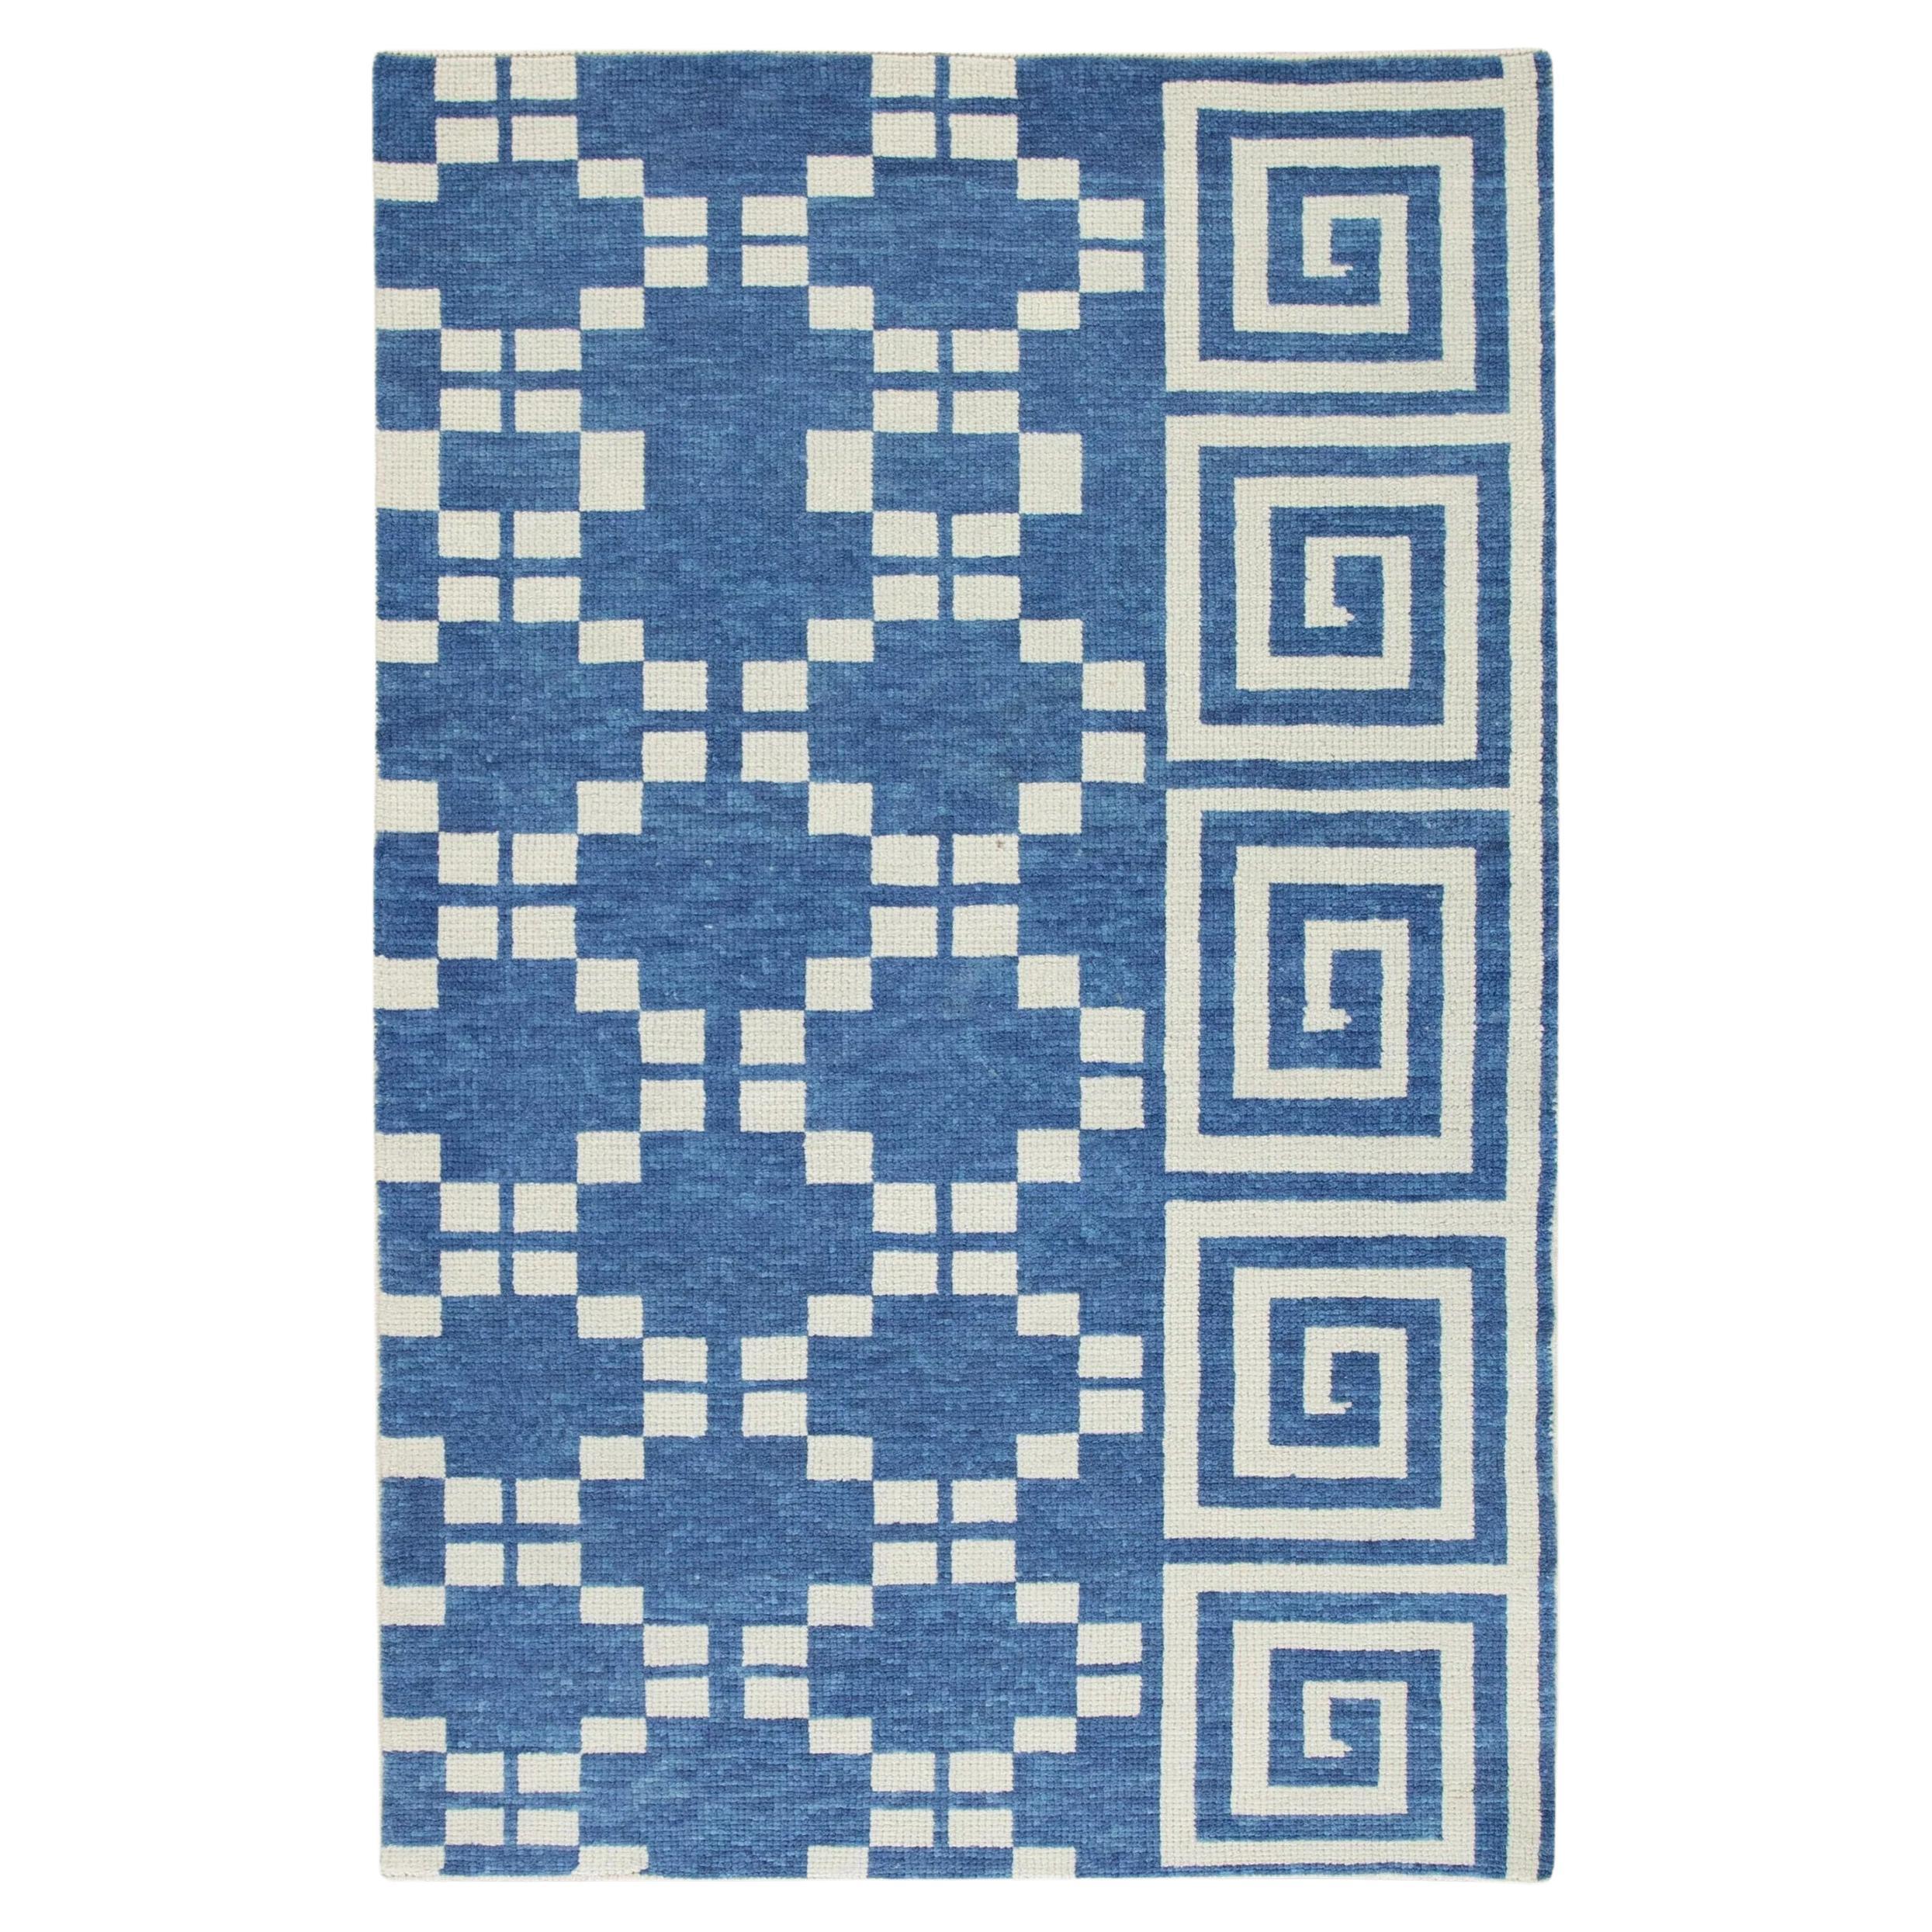 Tribal Geometric Handwoven Turkish Oushak Rug in Blue and Cream 3' x 5'2" For Sale